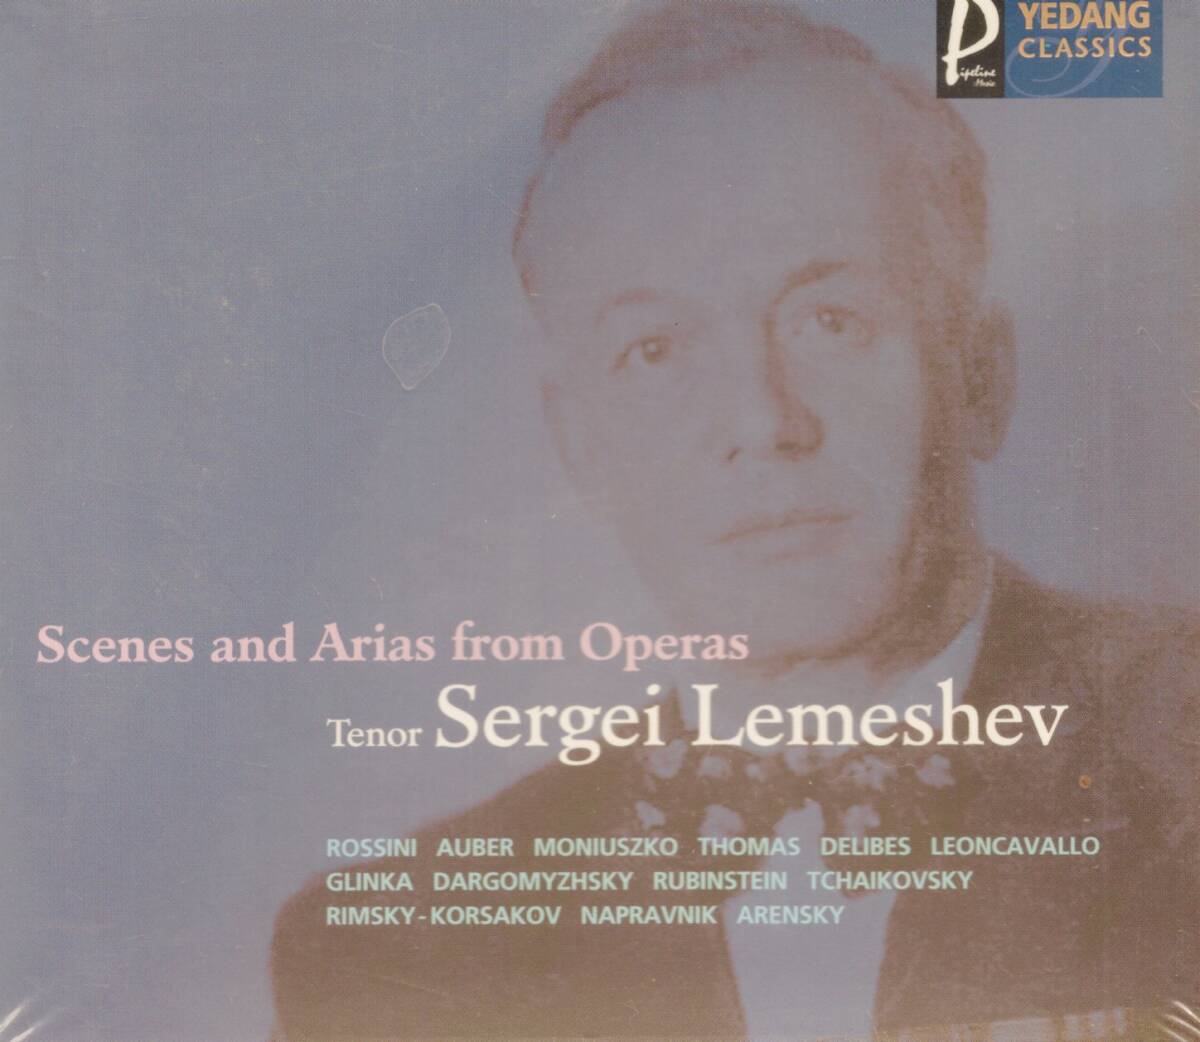 pc198  ロッシーニ他：SCENES AND ARIAS FROM OPERAS /LEMESHEVの画像1